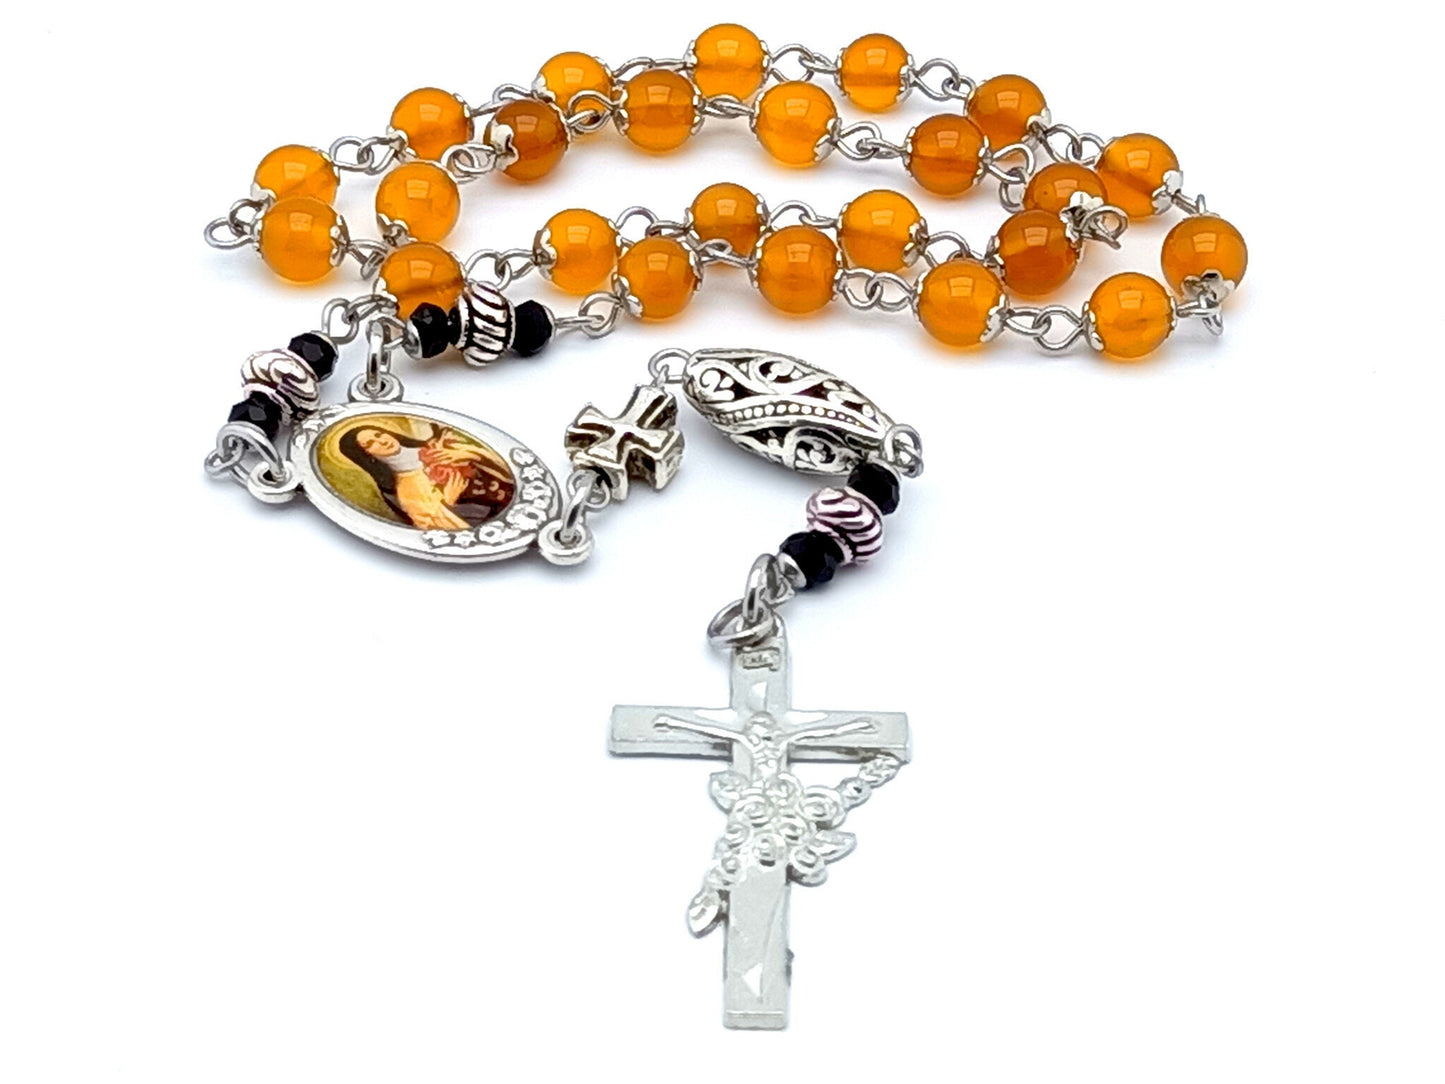 Saint Therese of Lisieux unique rosary beads prayer chaplet with orange agate gemstone beads, floral crucifix and picture centre medal.